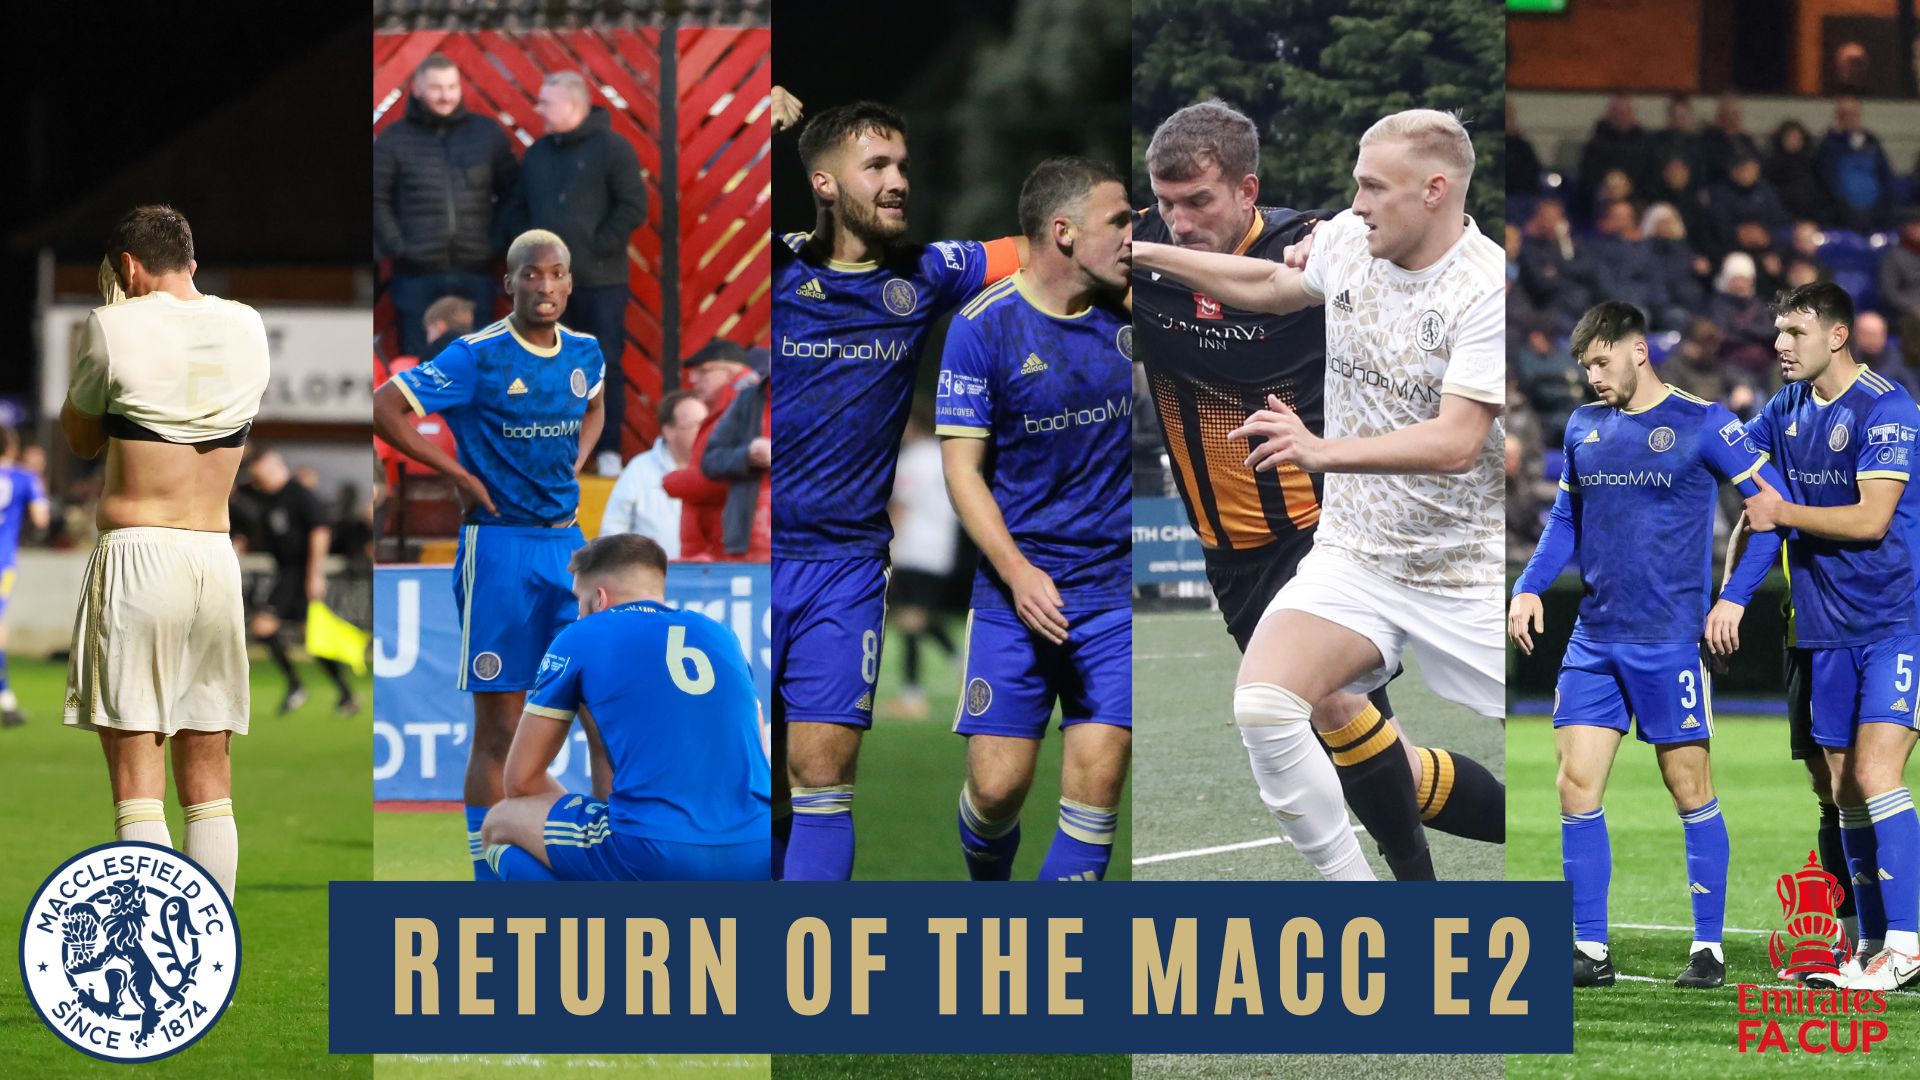 RETURN OF THE MACC: EPISODE TWO